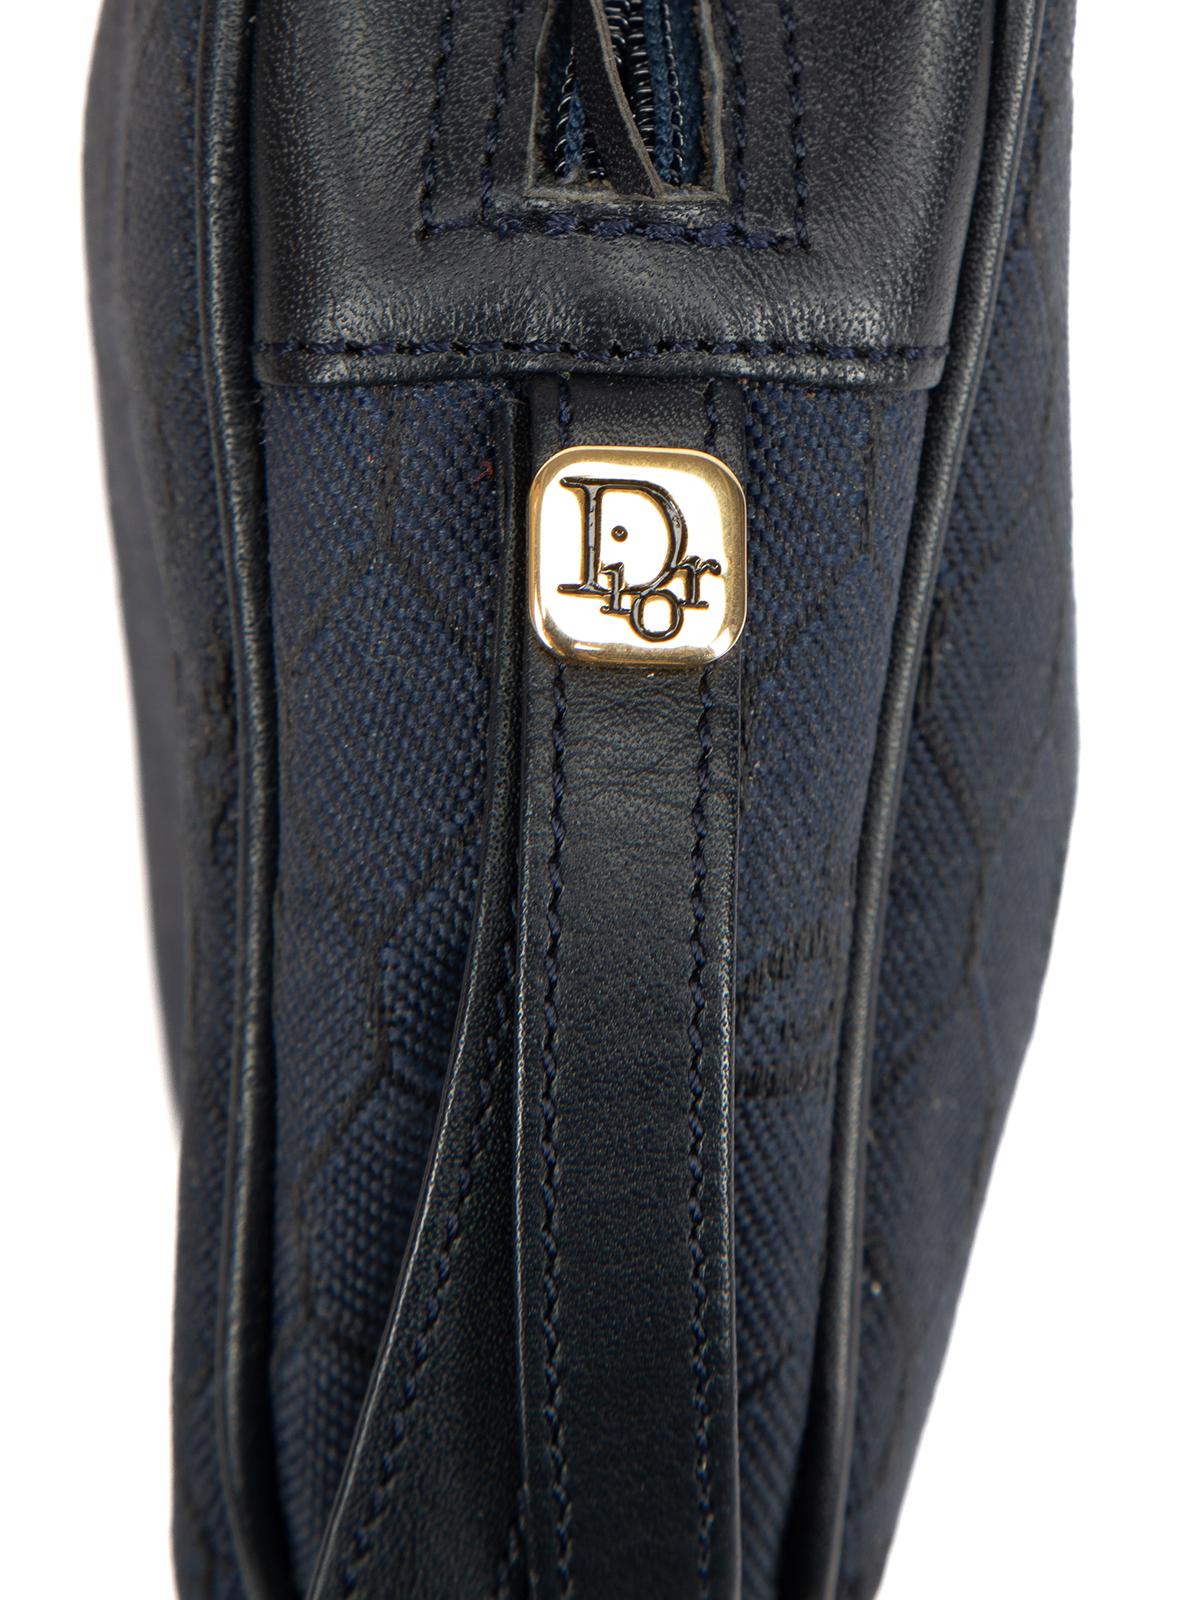 Dior Women's Vintage Navy Leather Bag Organiser Pouch 4